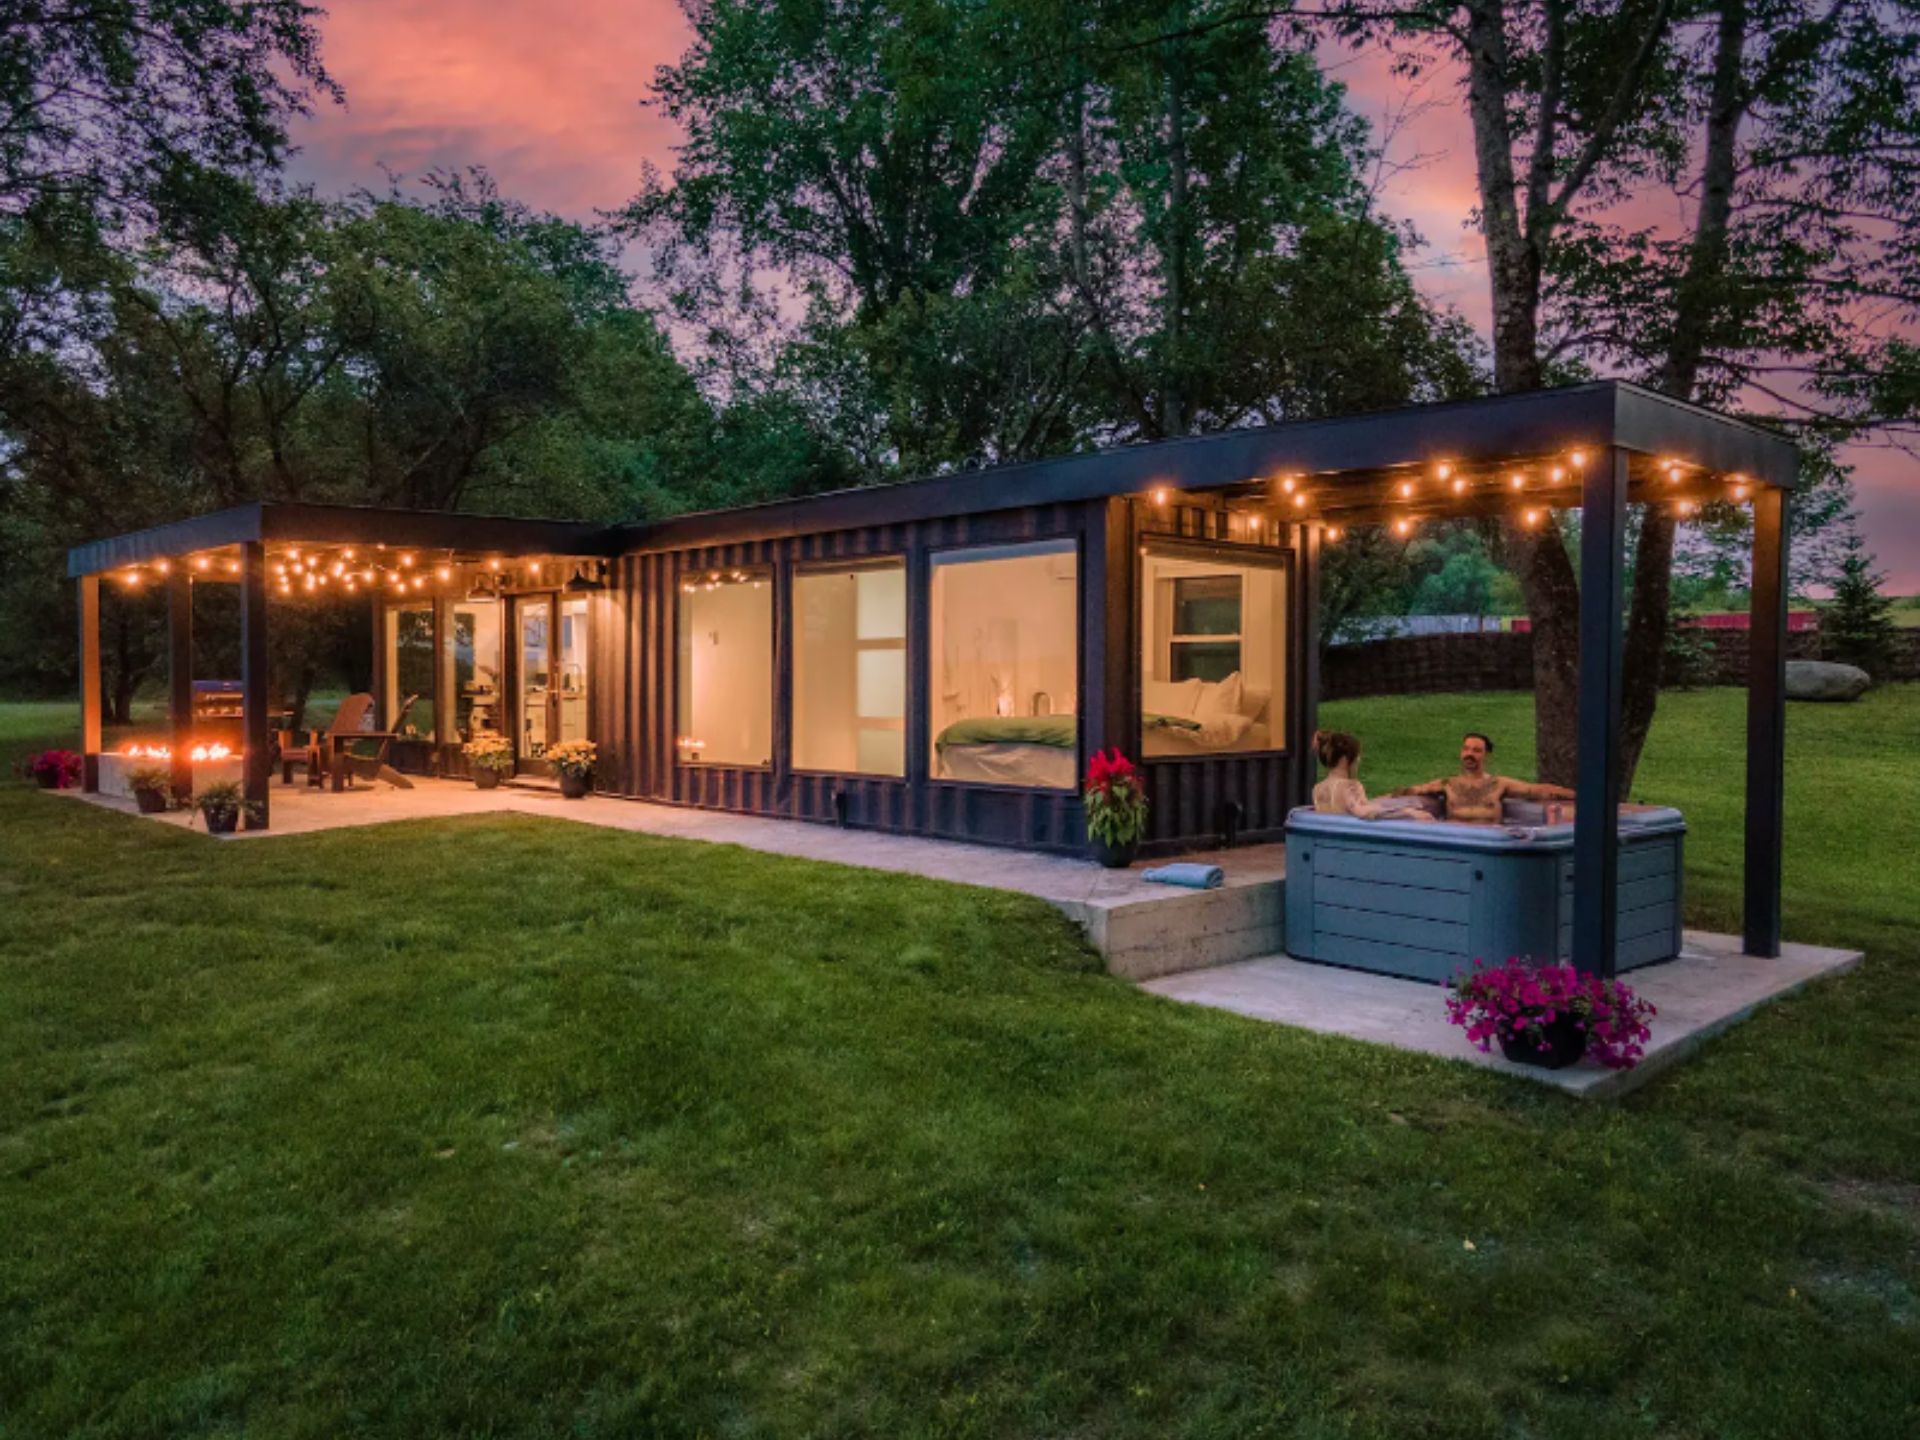 This Tiny Orchard Container House Is Your Dream Garden Retreat